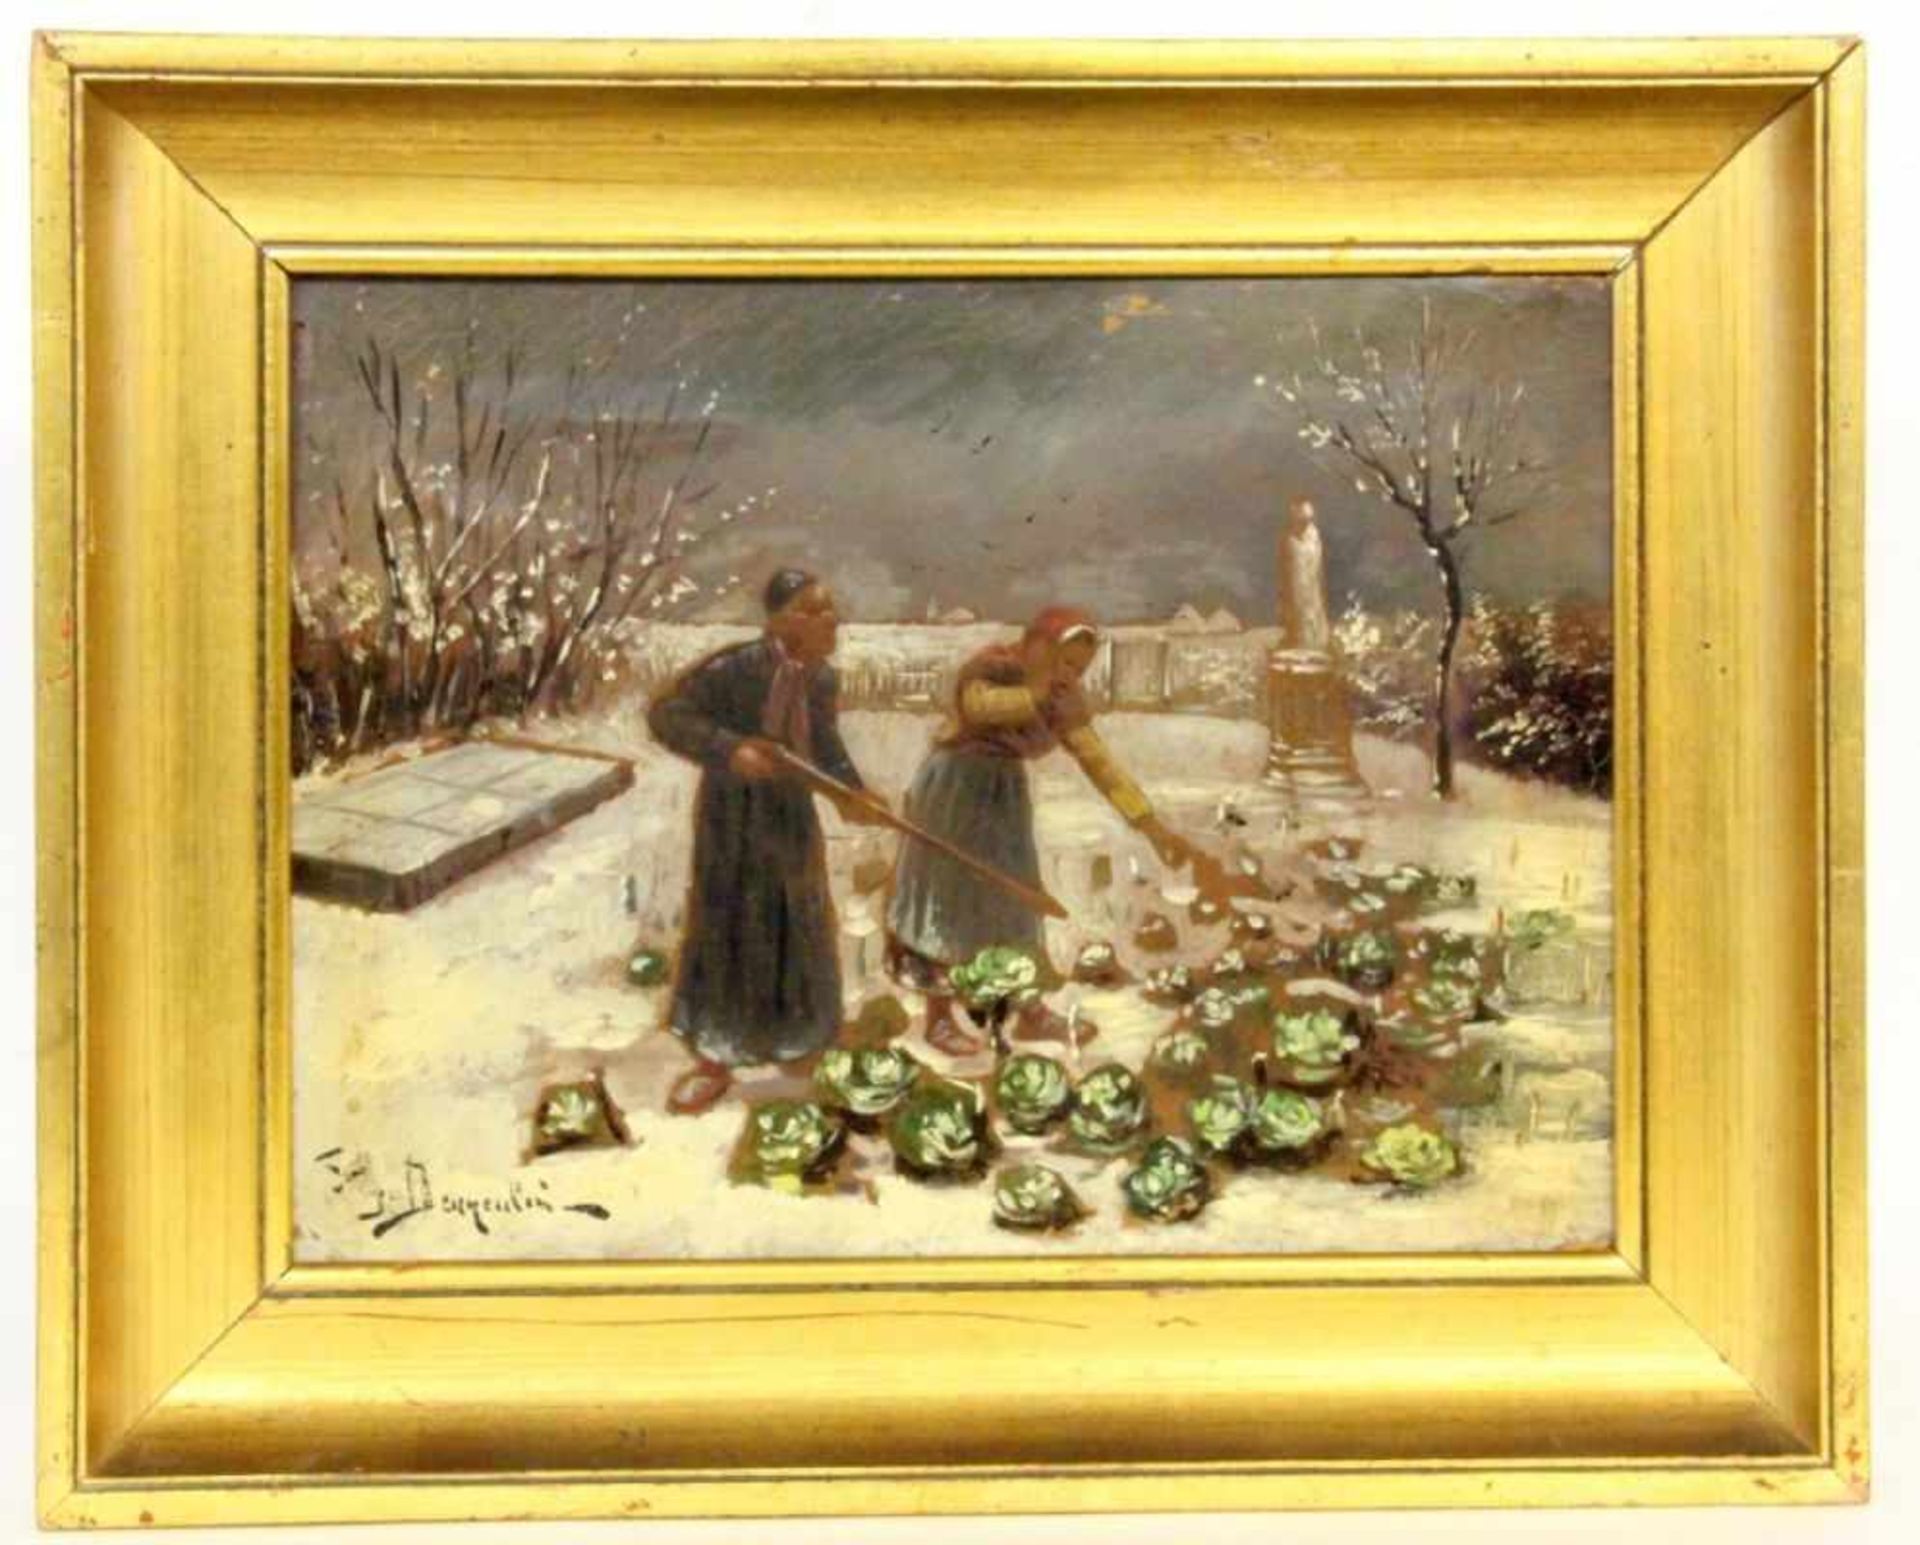 (Referred to as) DENNEULIN, JULES 19th century Working in the monastery garden. Oil oncanvas,